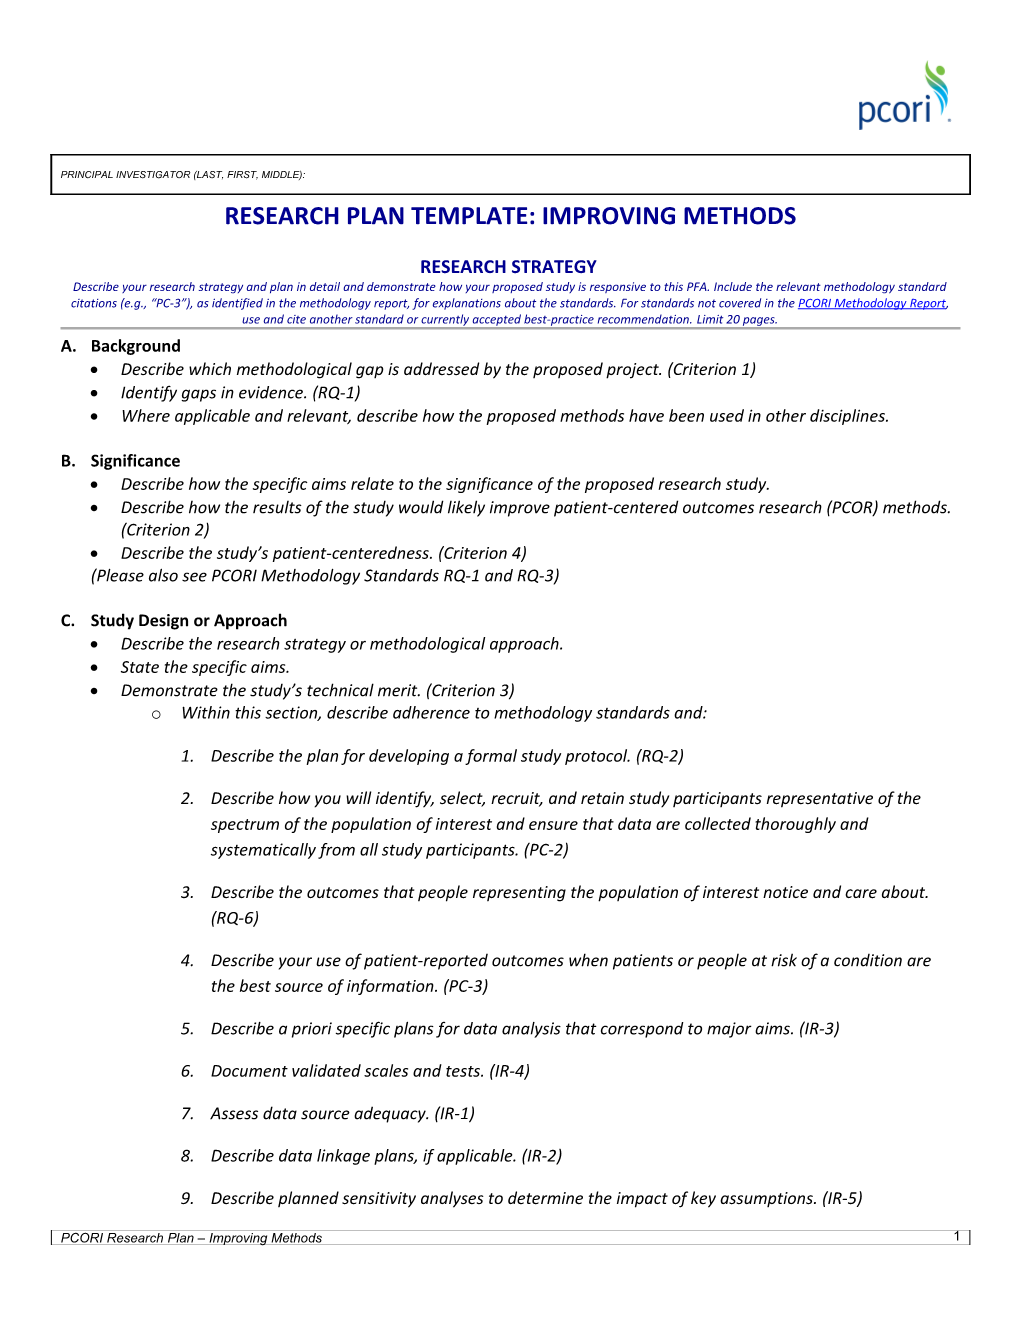 Research Plan Template: Improving Methods